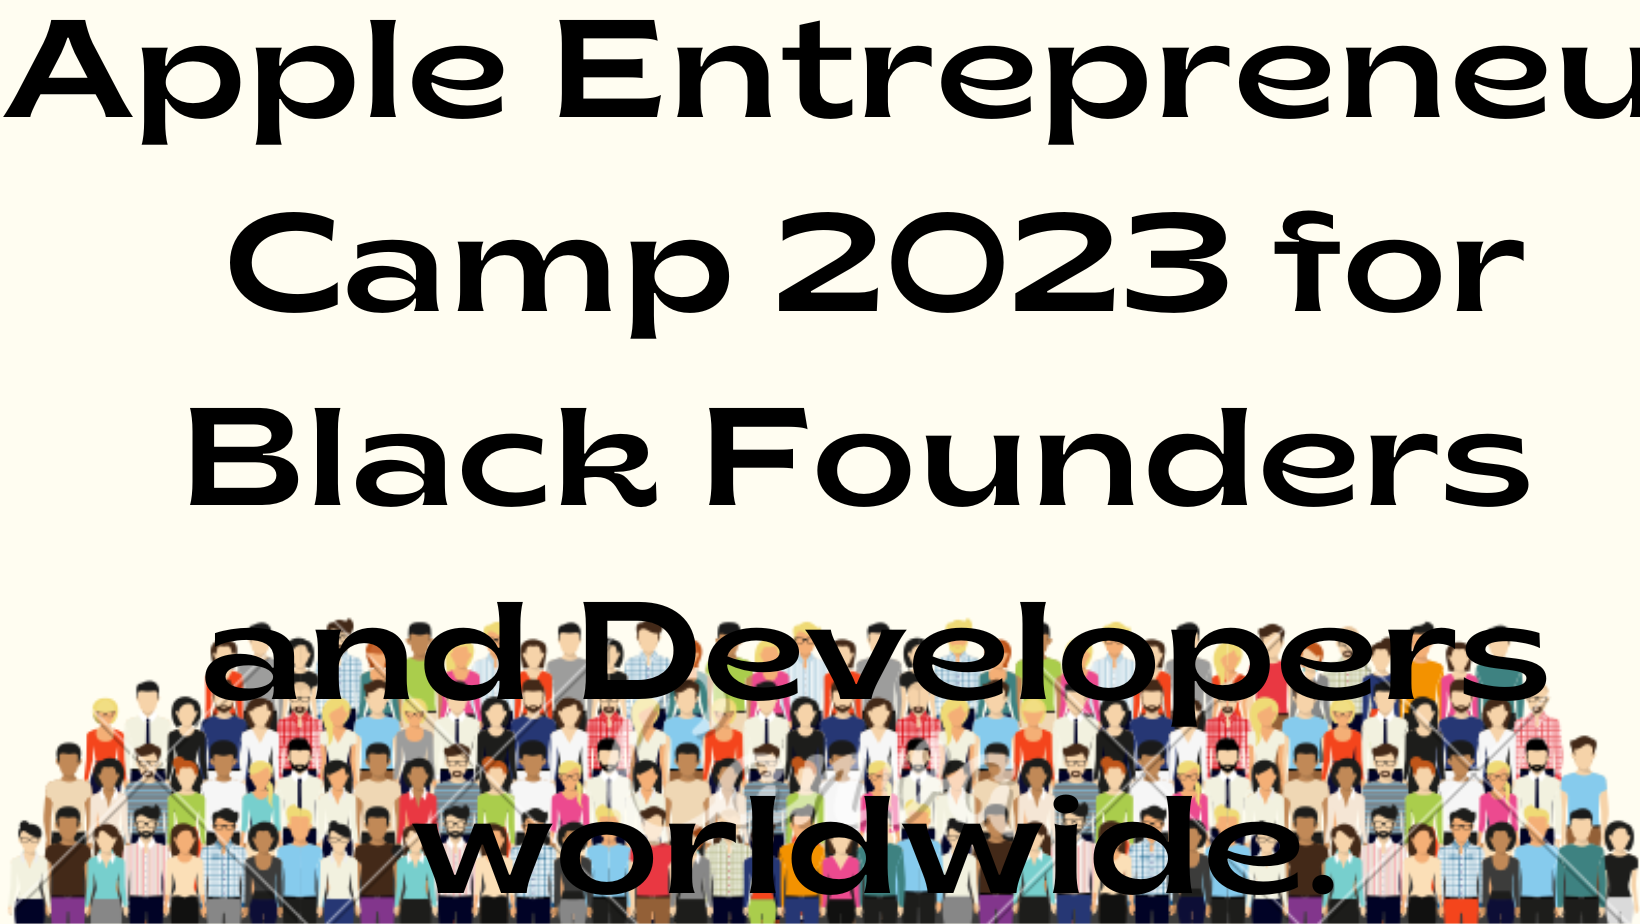 png 20221016 133359 0000 - Apple Entrepreneur Camp 2023 for Black Founders and Developers worldwide.